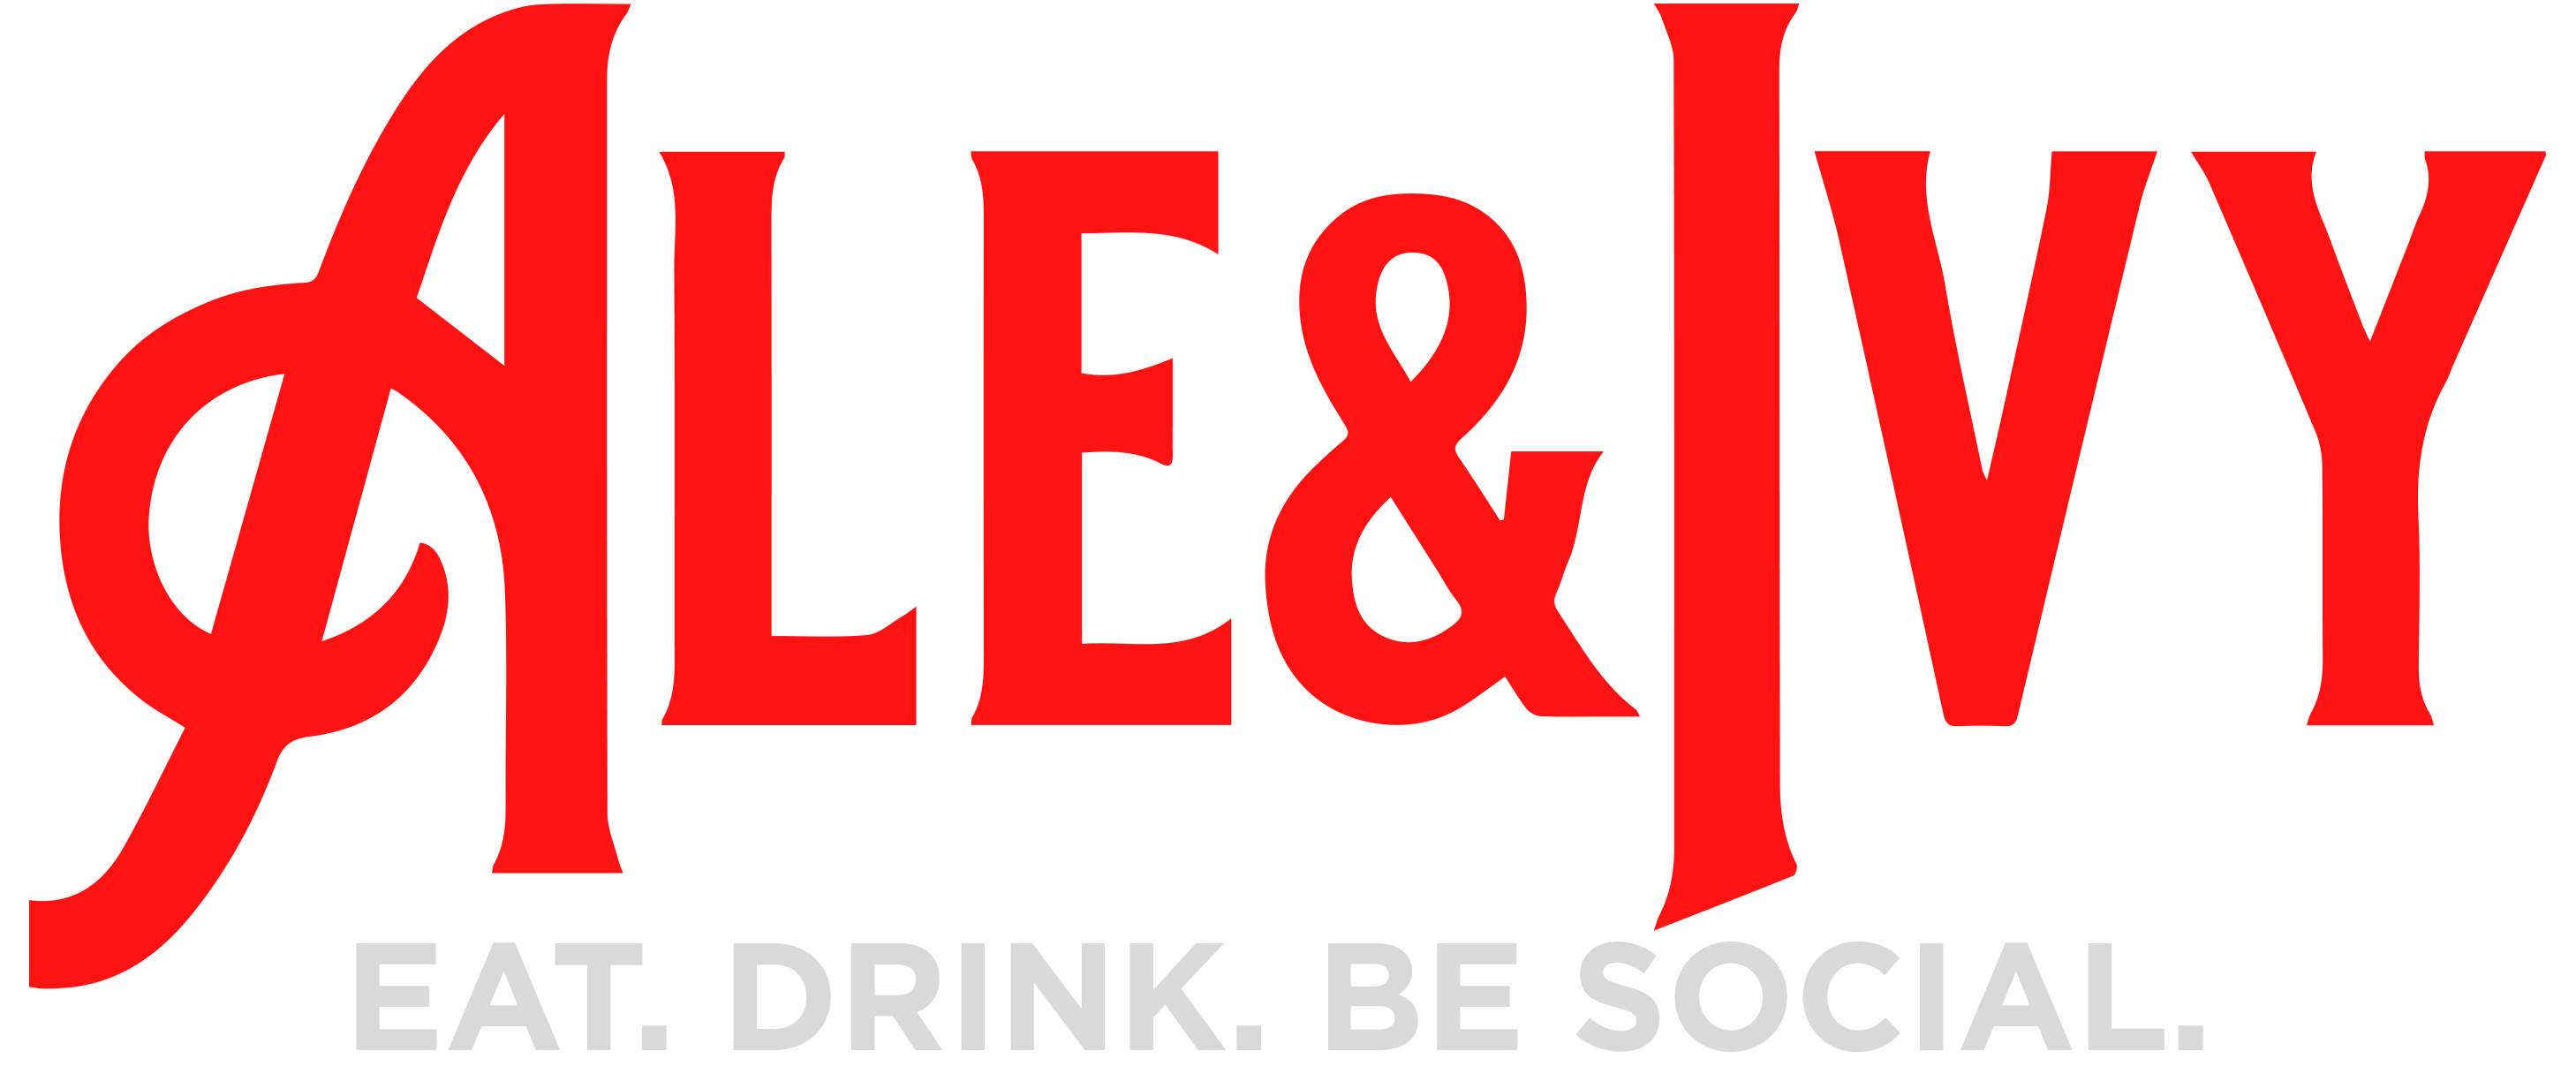 Ale and Ivy logo